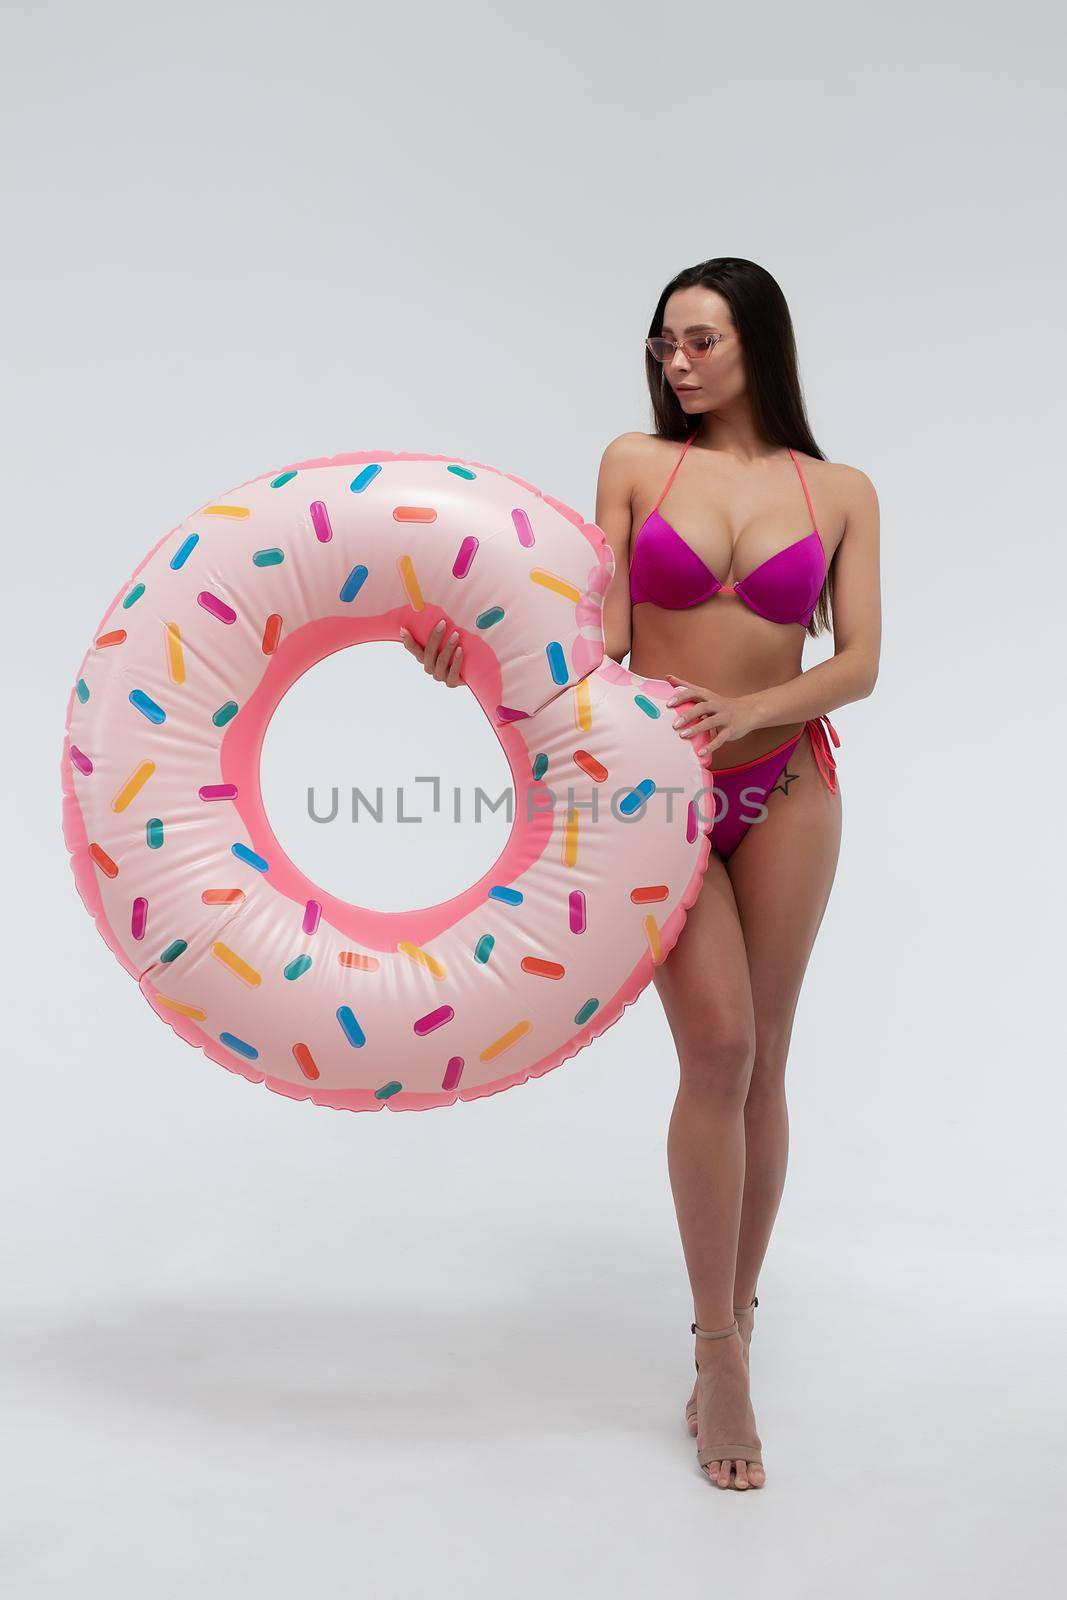 Seductive woman in swimwear with inflatable ring by 3KStudio